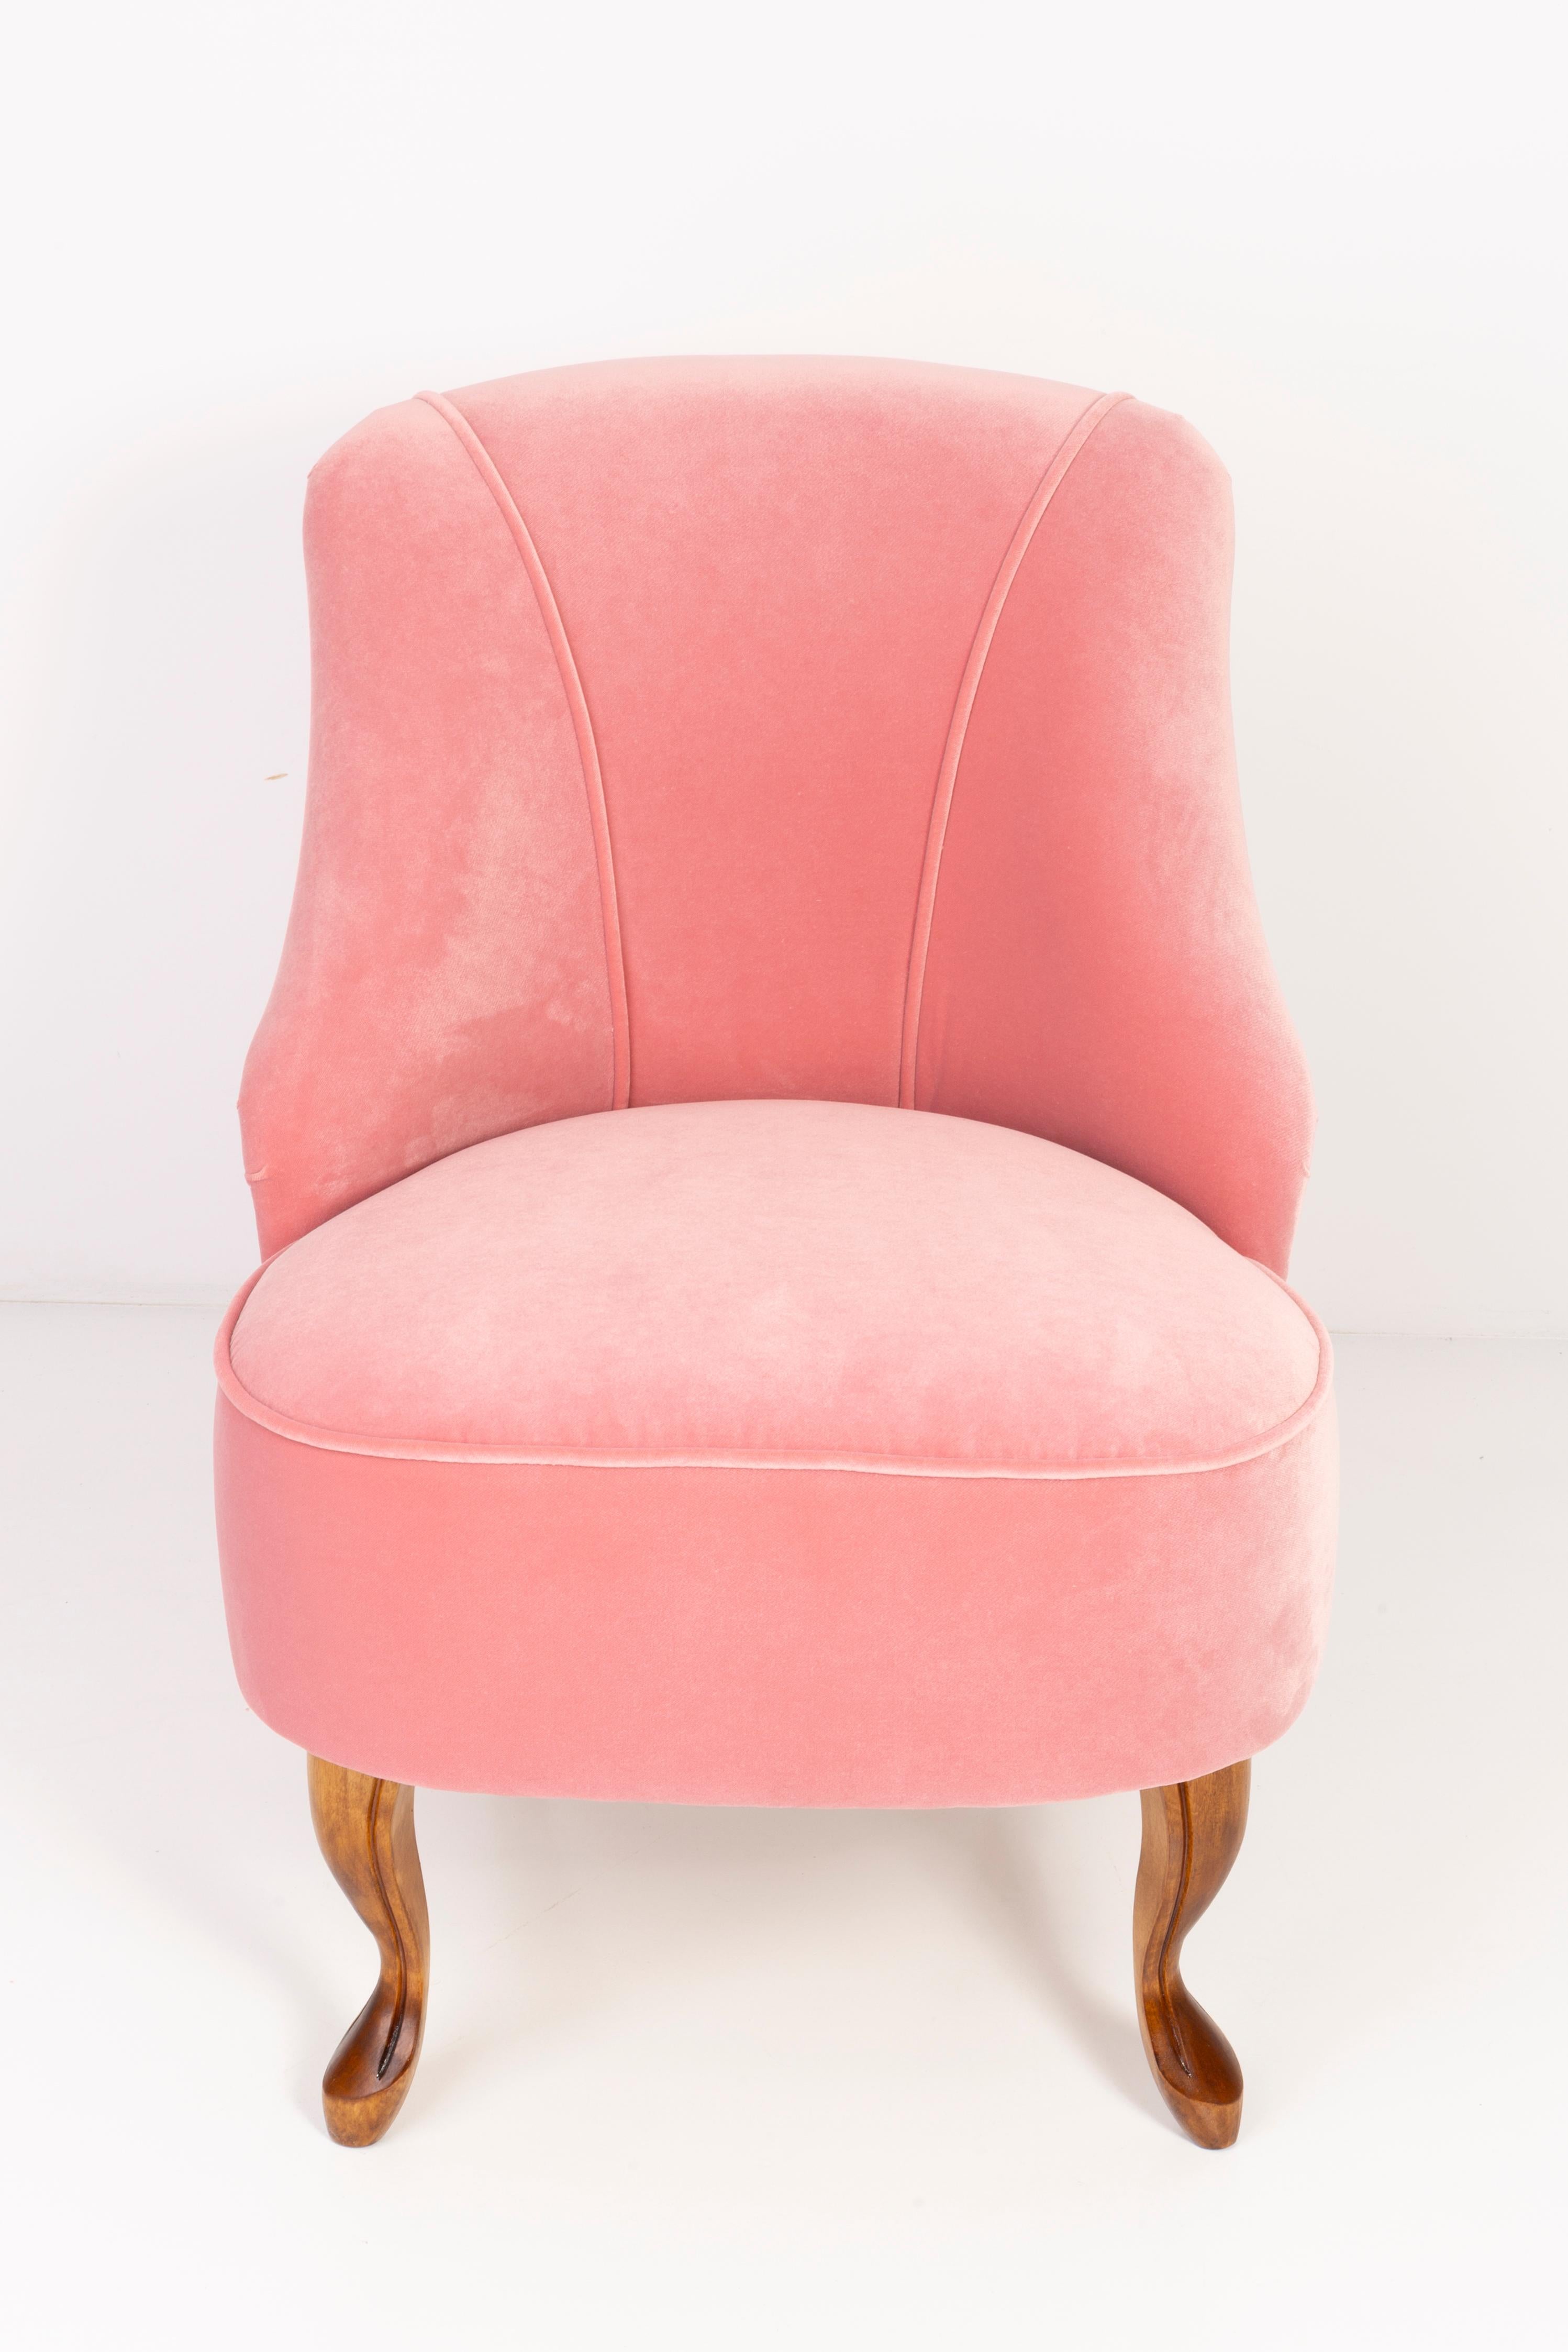 European Set of Two 20th Century Art Deco Baby Pink Armchairs, 1950s For Sale